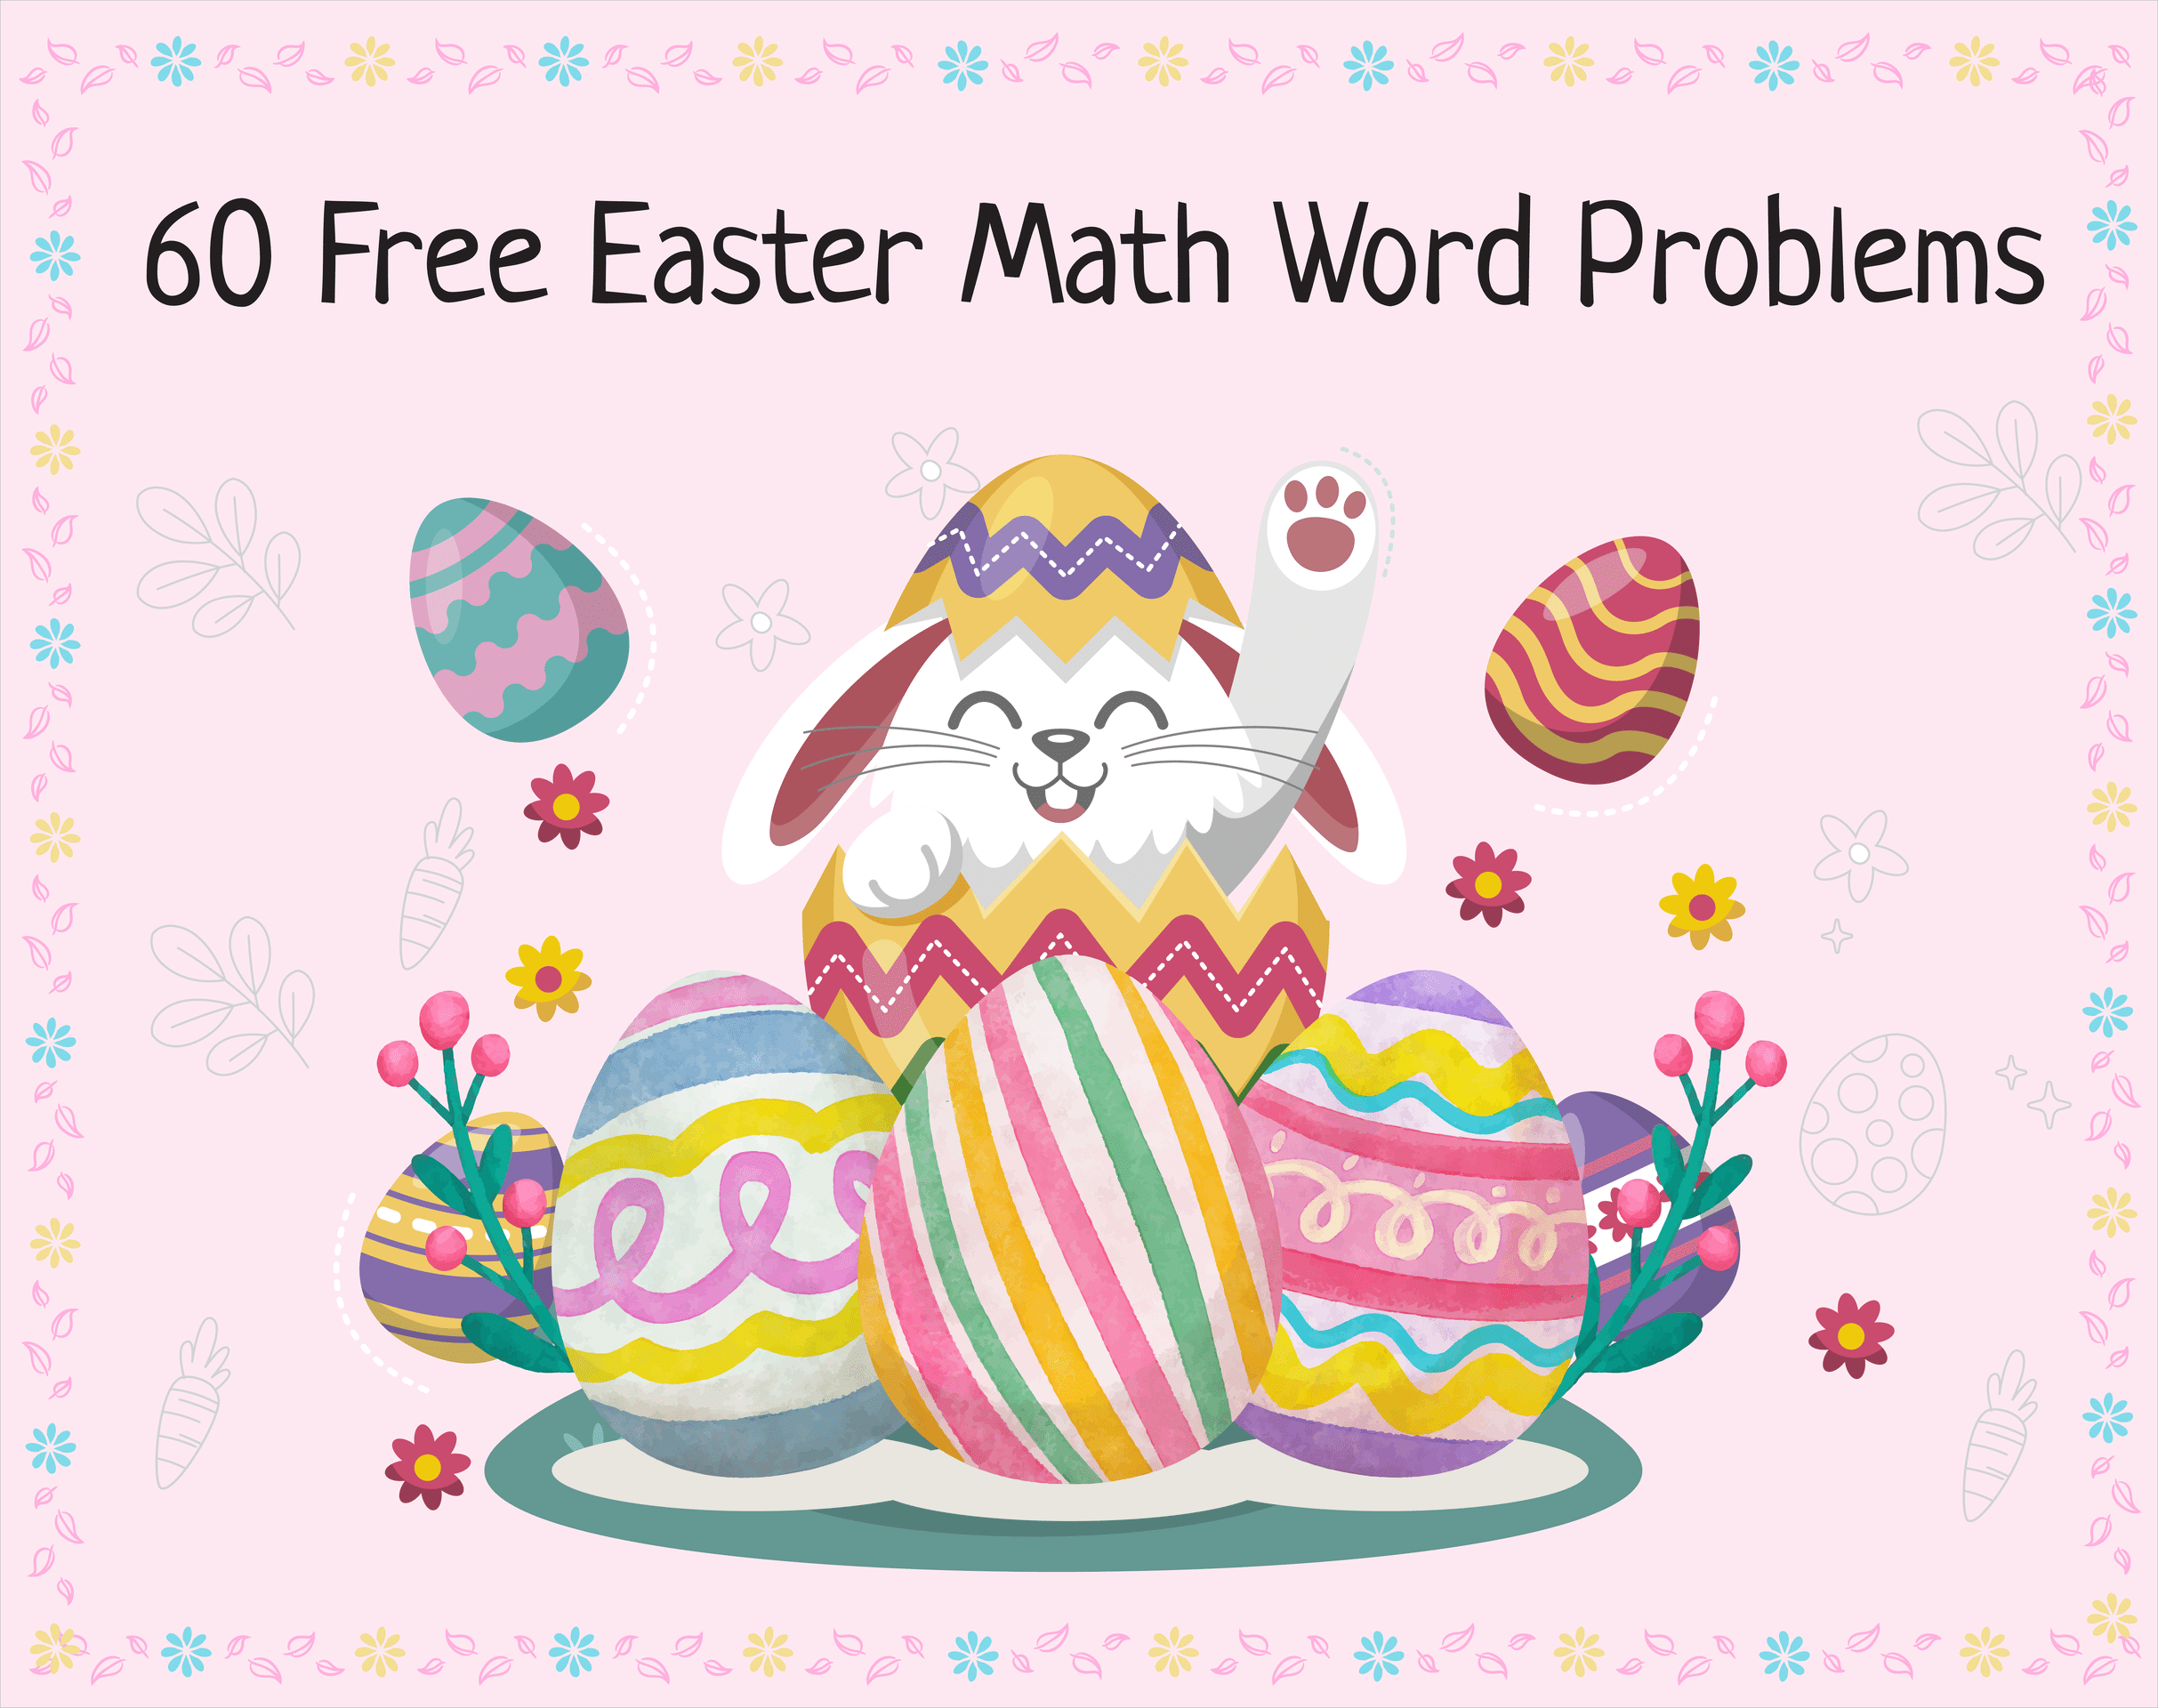 60 Free Easter Math Word Problems overview